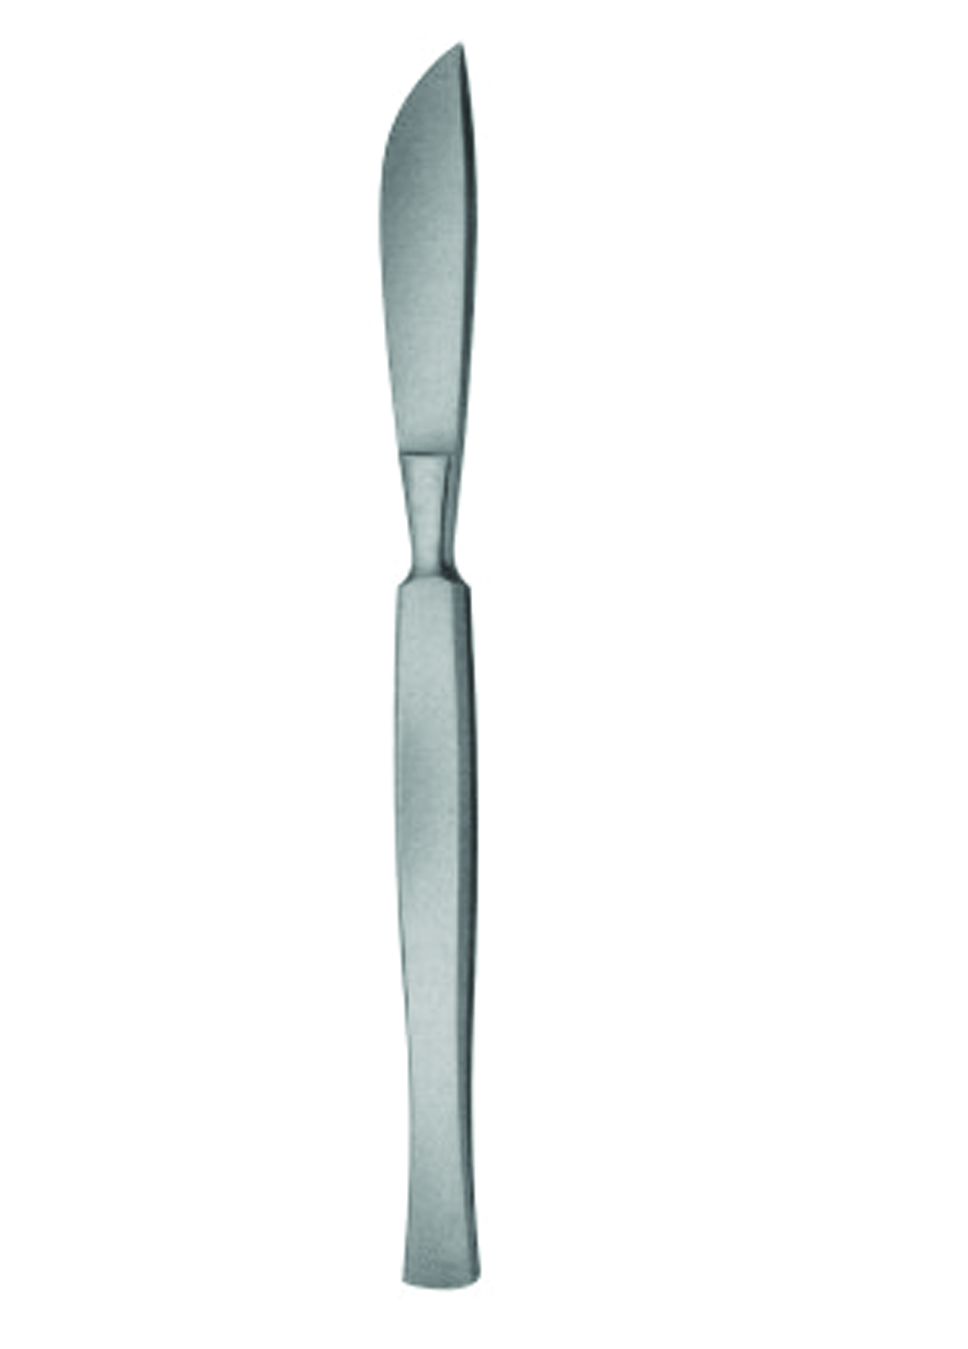 Amputation and Resection Knives